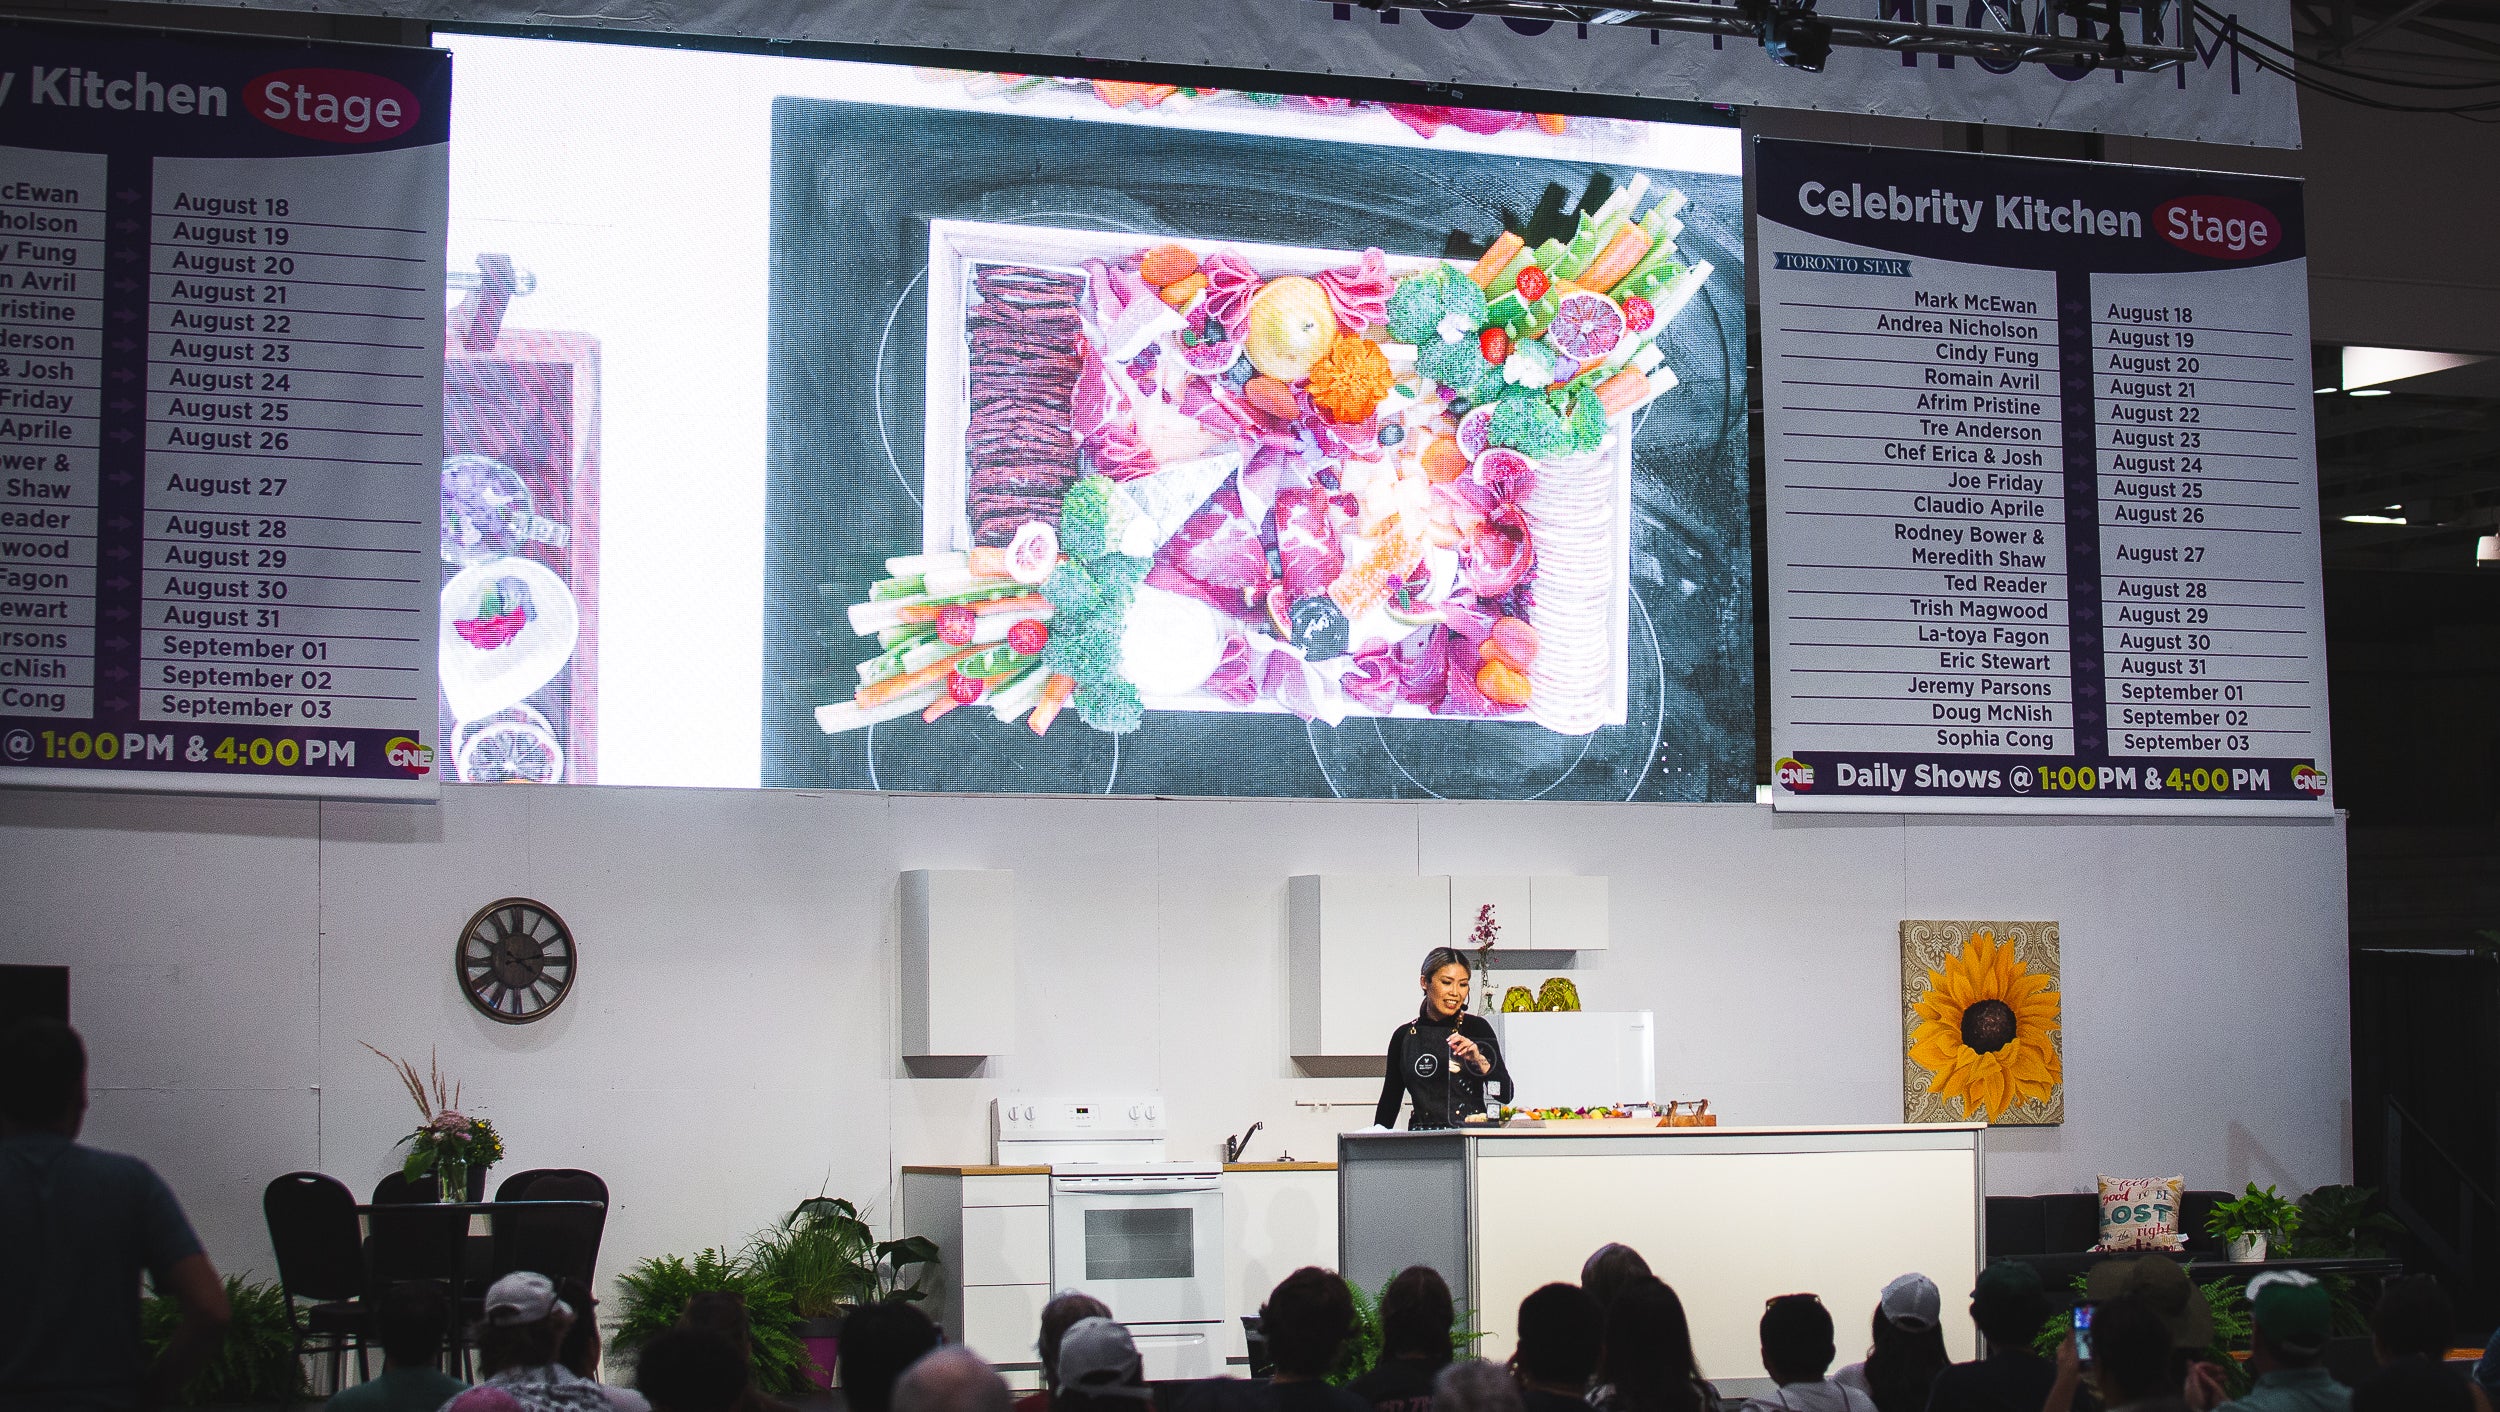 The Graze Anatomy teaches charcuterie boards at The Canadian National Exhibition!